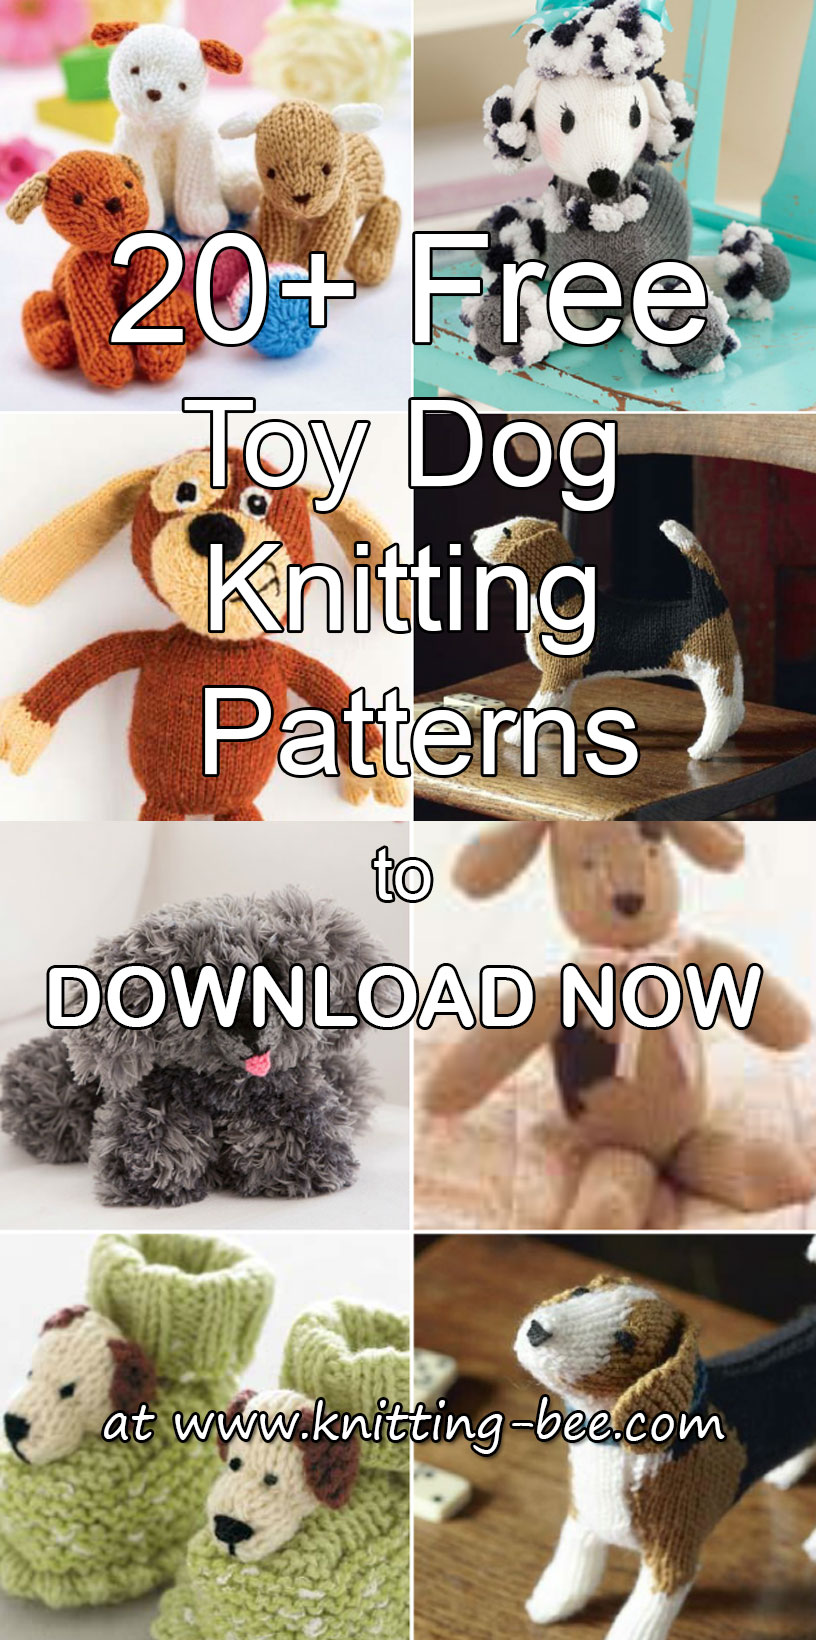 More than 20 Free Toy Dog Knitting Patterns to Download Now https://www.knitting-bee.com/free-knitting-patterns/free-knitted-toy-patterns/20-free-toy-dog-knitting-patterns-download-now